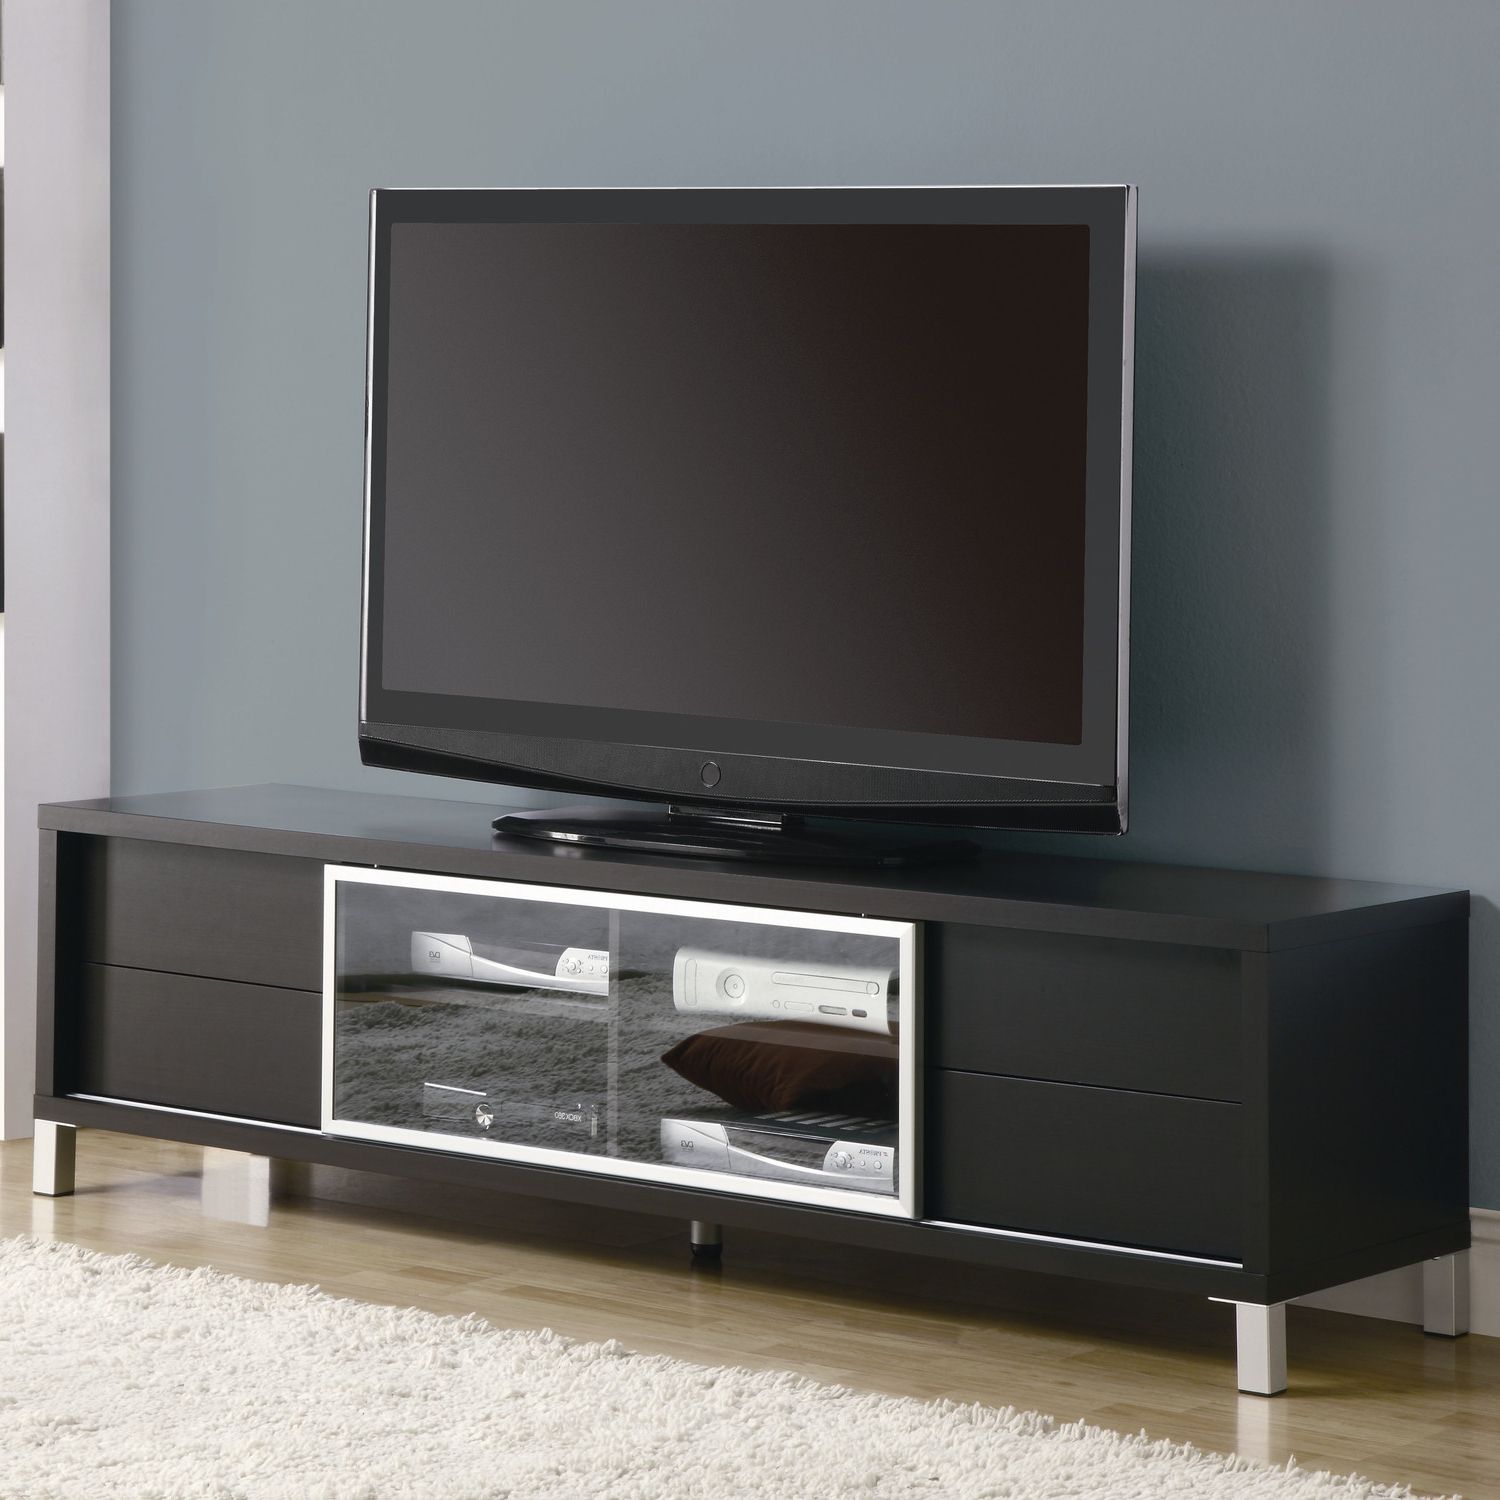 The Different Options In Types With Tv Stand Black Design – Furnish Within Best And Newest Unusual Tv Cabinets (View 14 of 20)